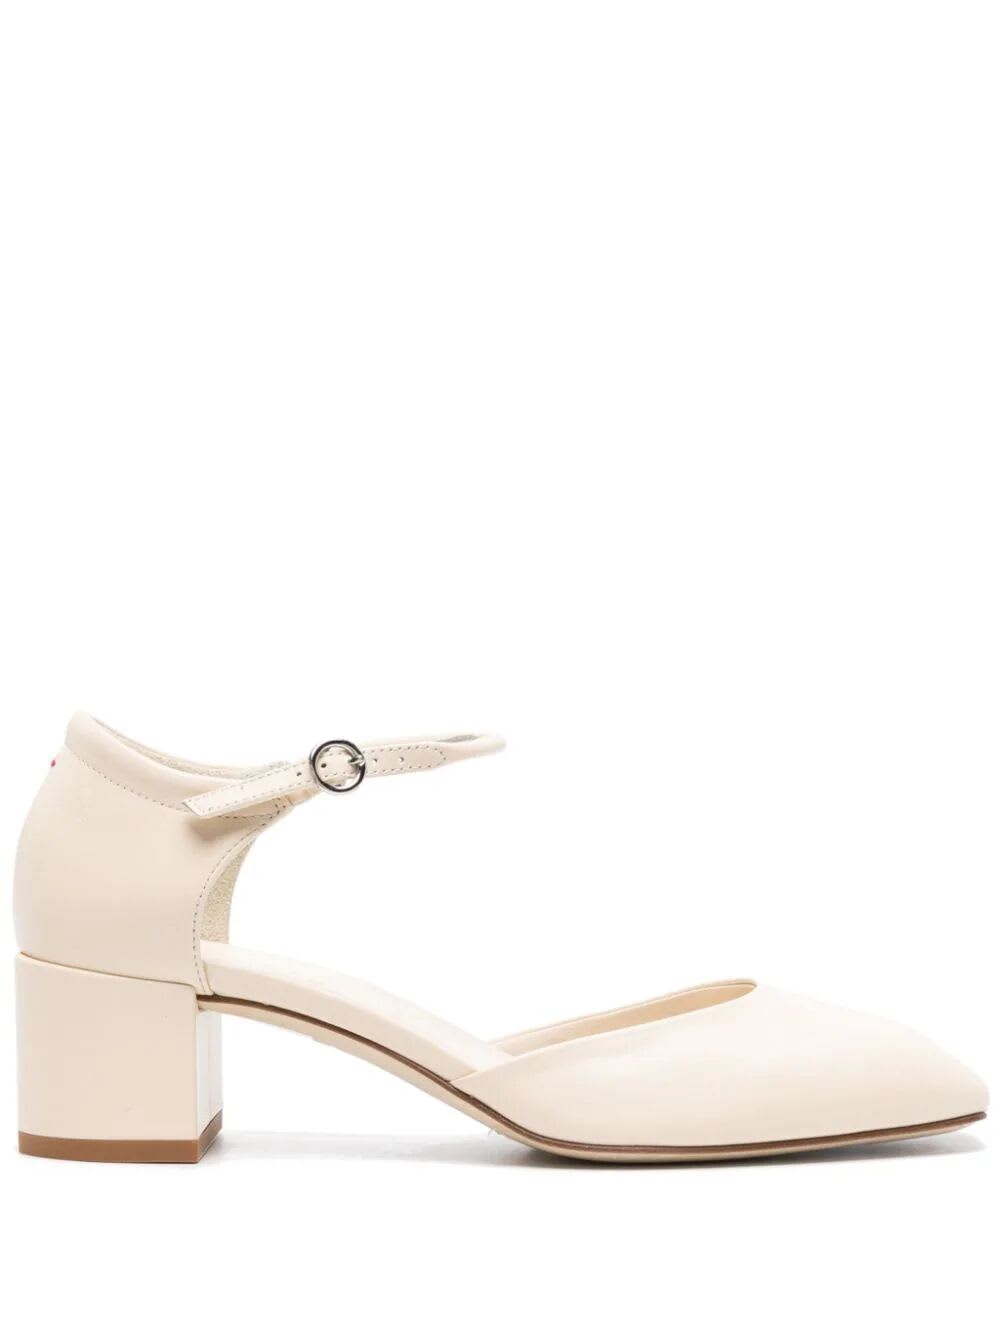 Shop Aeyde Magda Nappa Leather Creamy Shoes